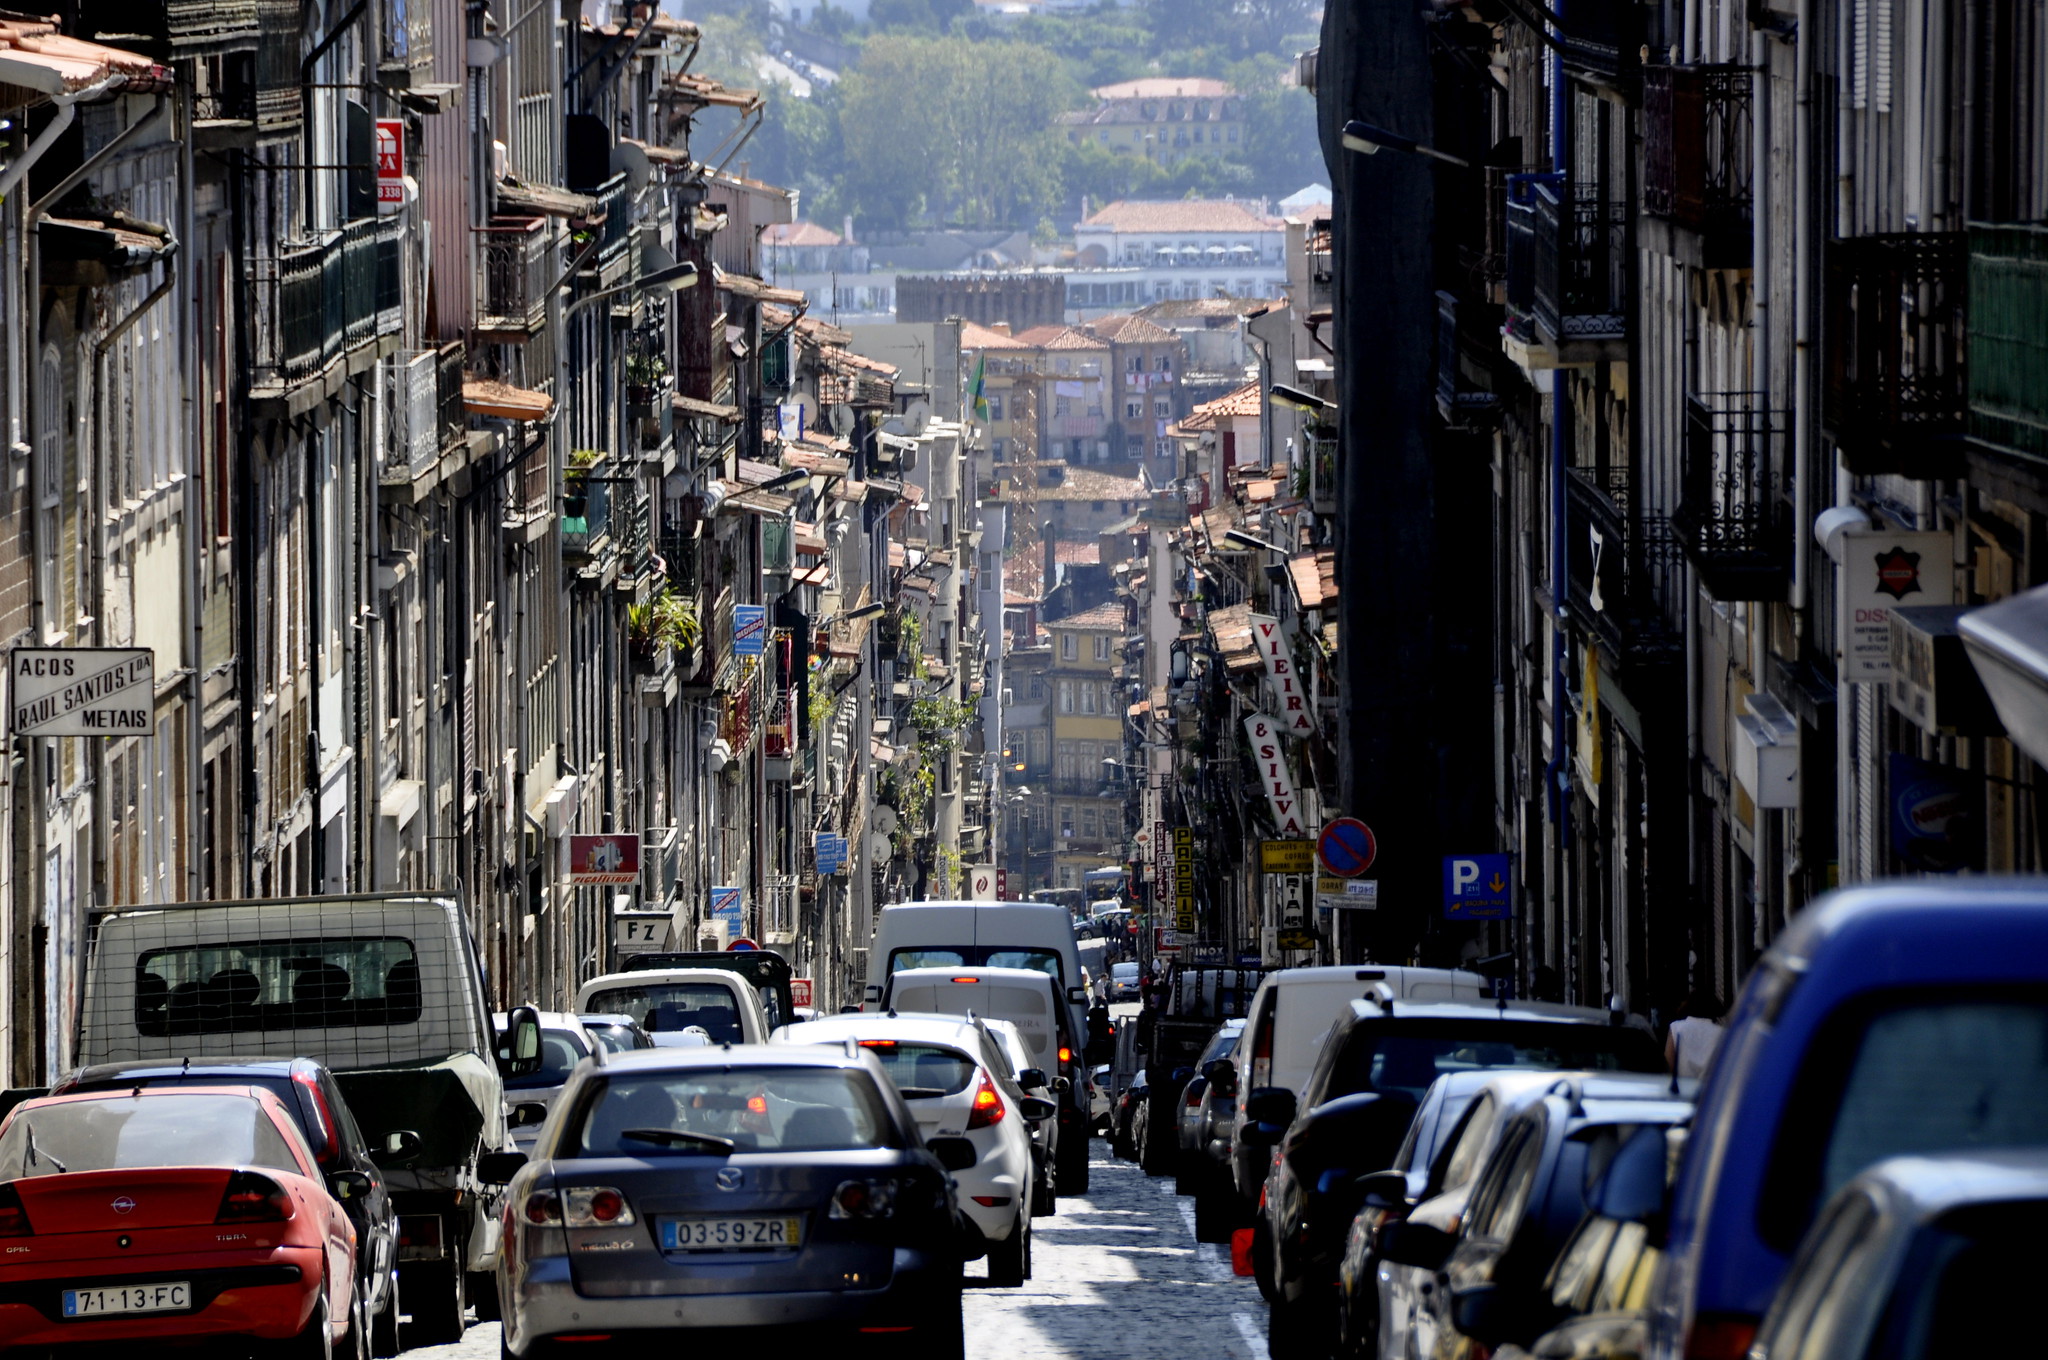 In Porto, the car is a (false) symbol of freedom